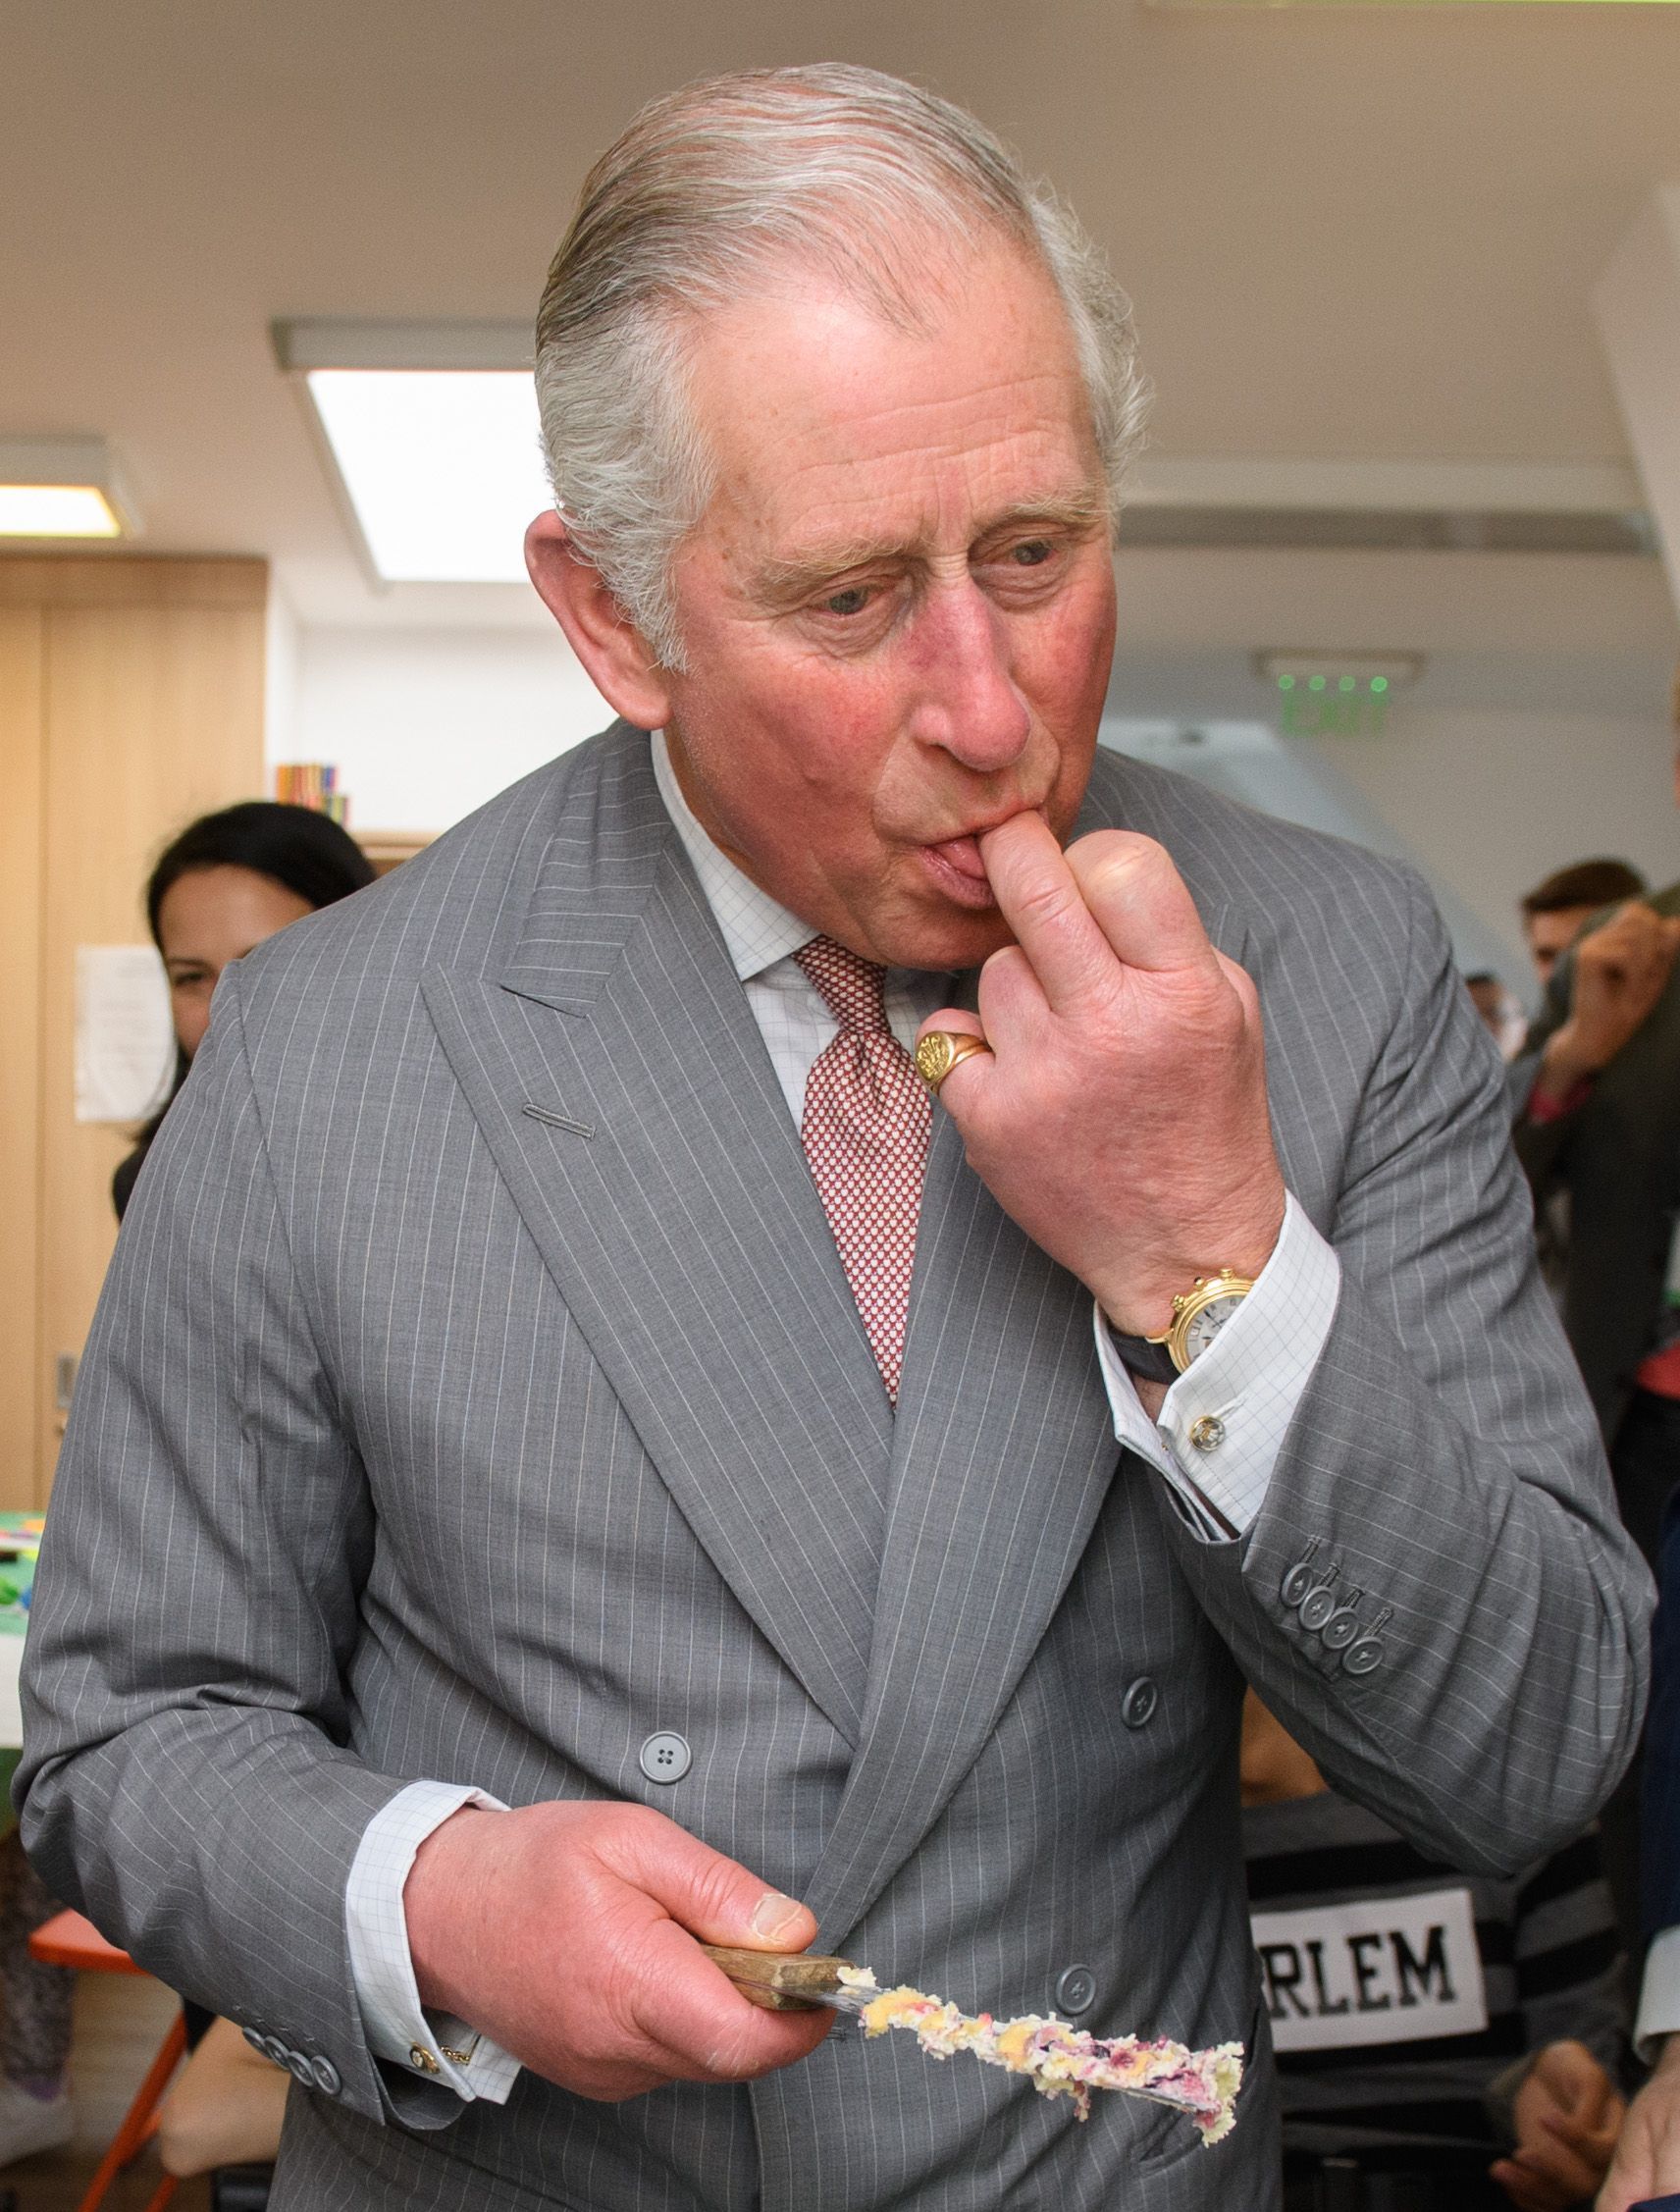 Prince Charles - Celeb pics that haven't aged well amid pandemic ...